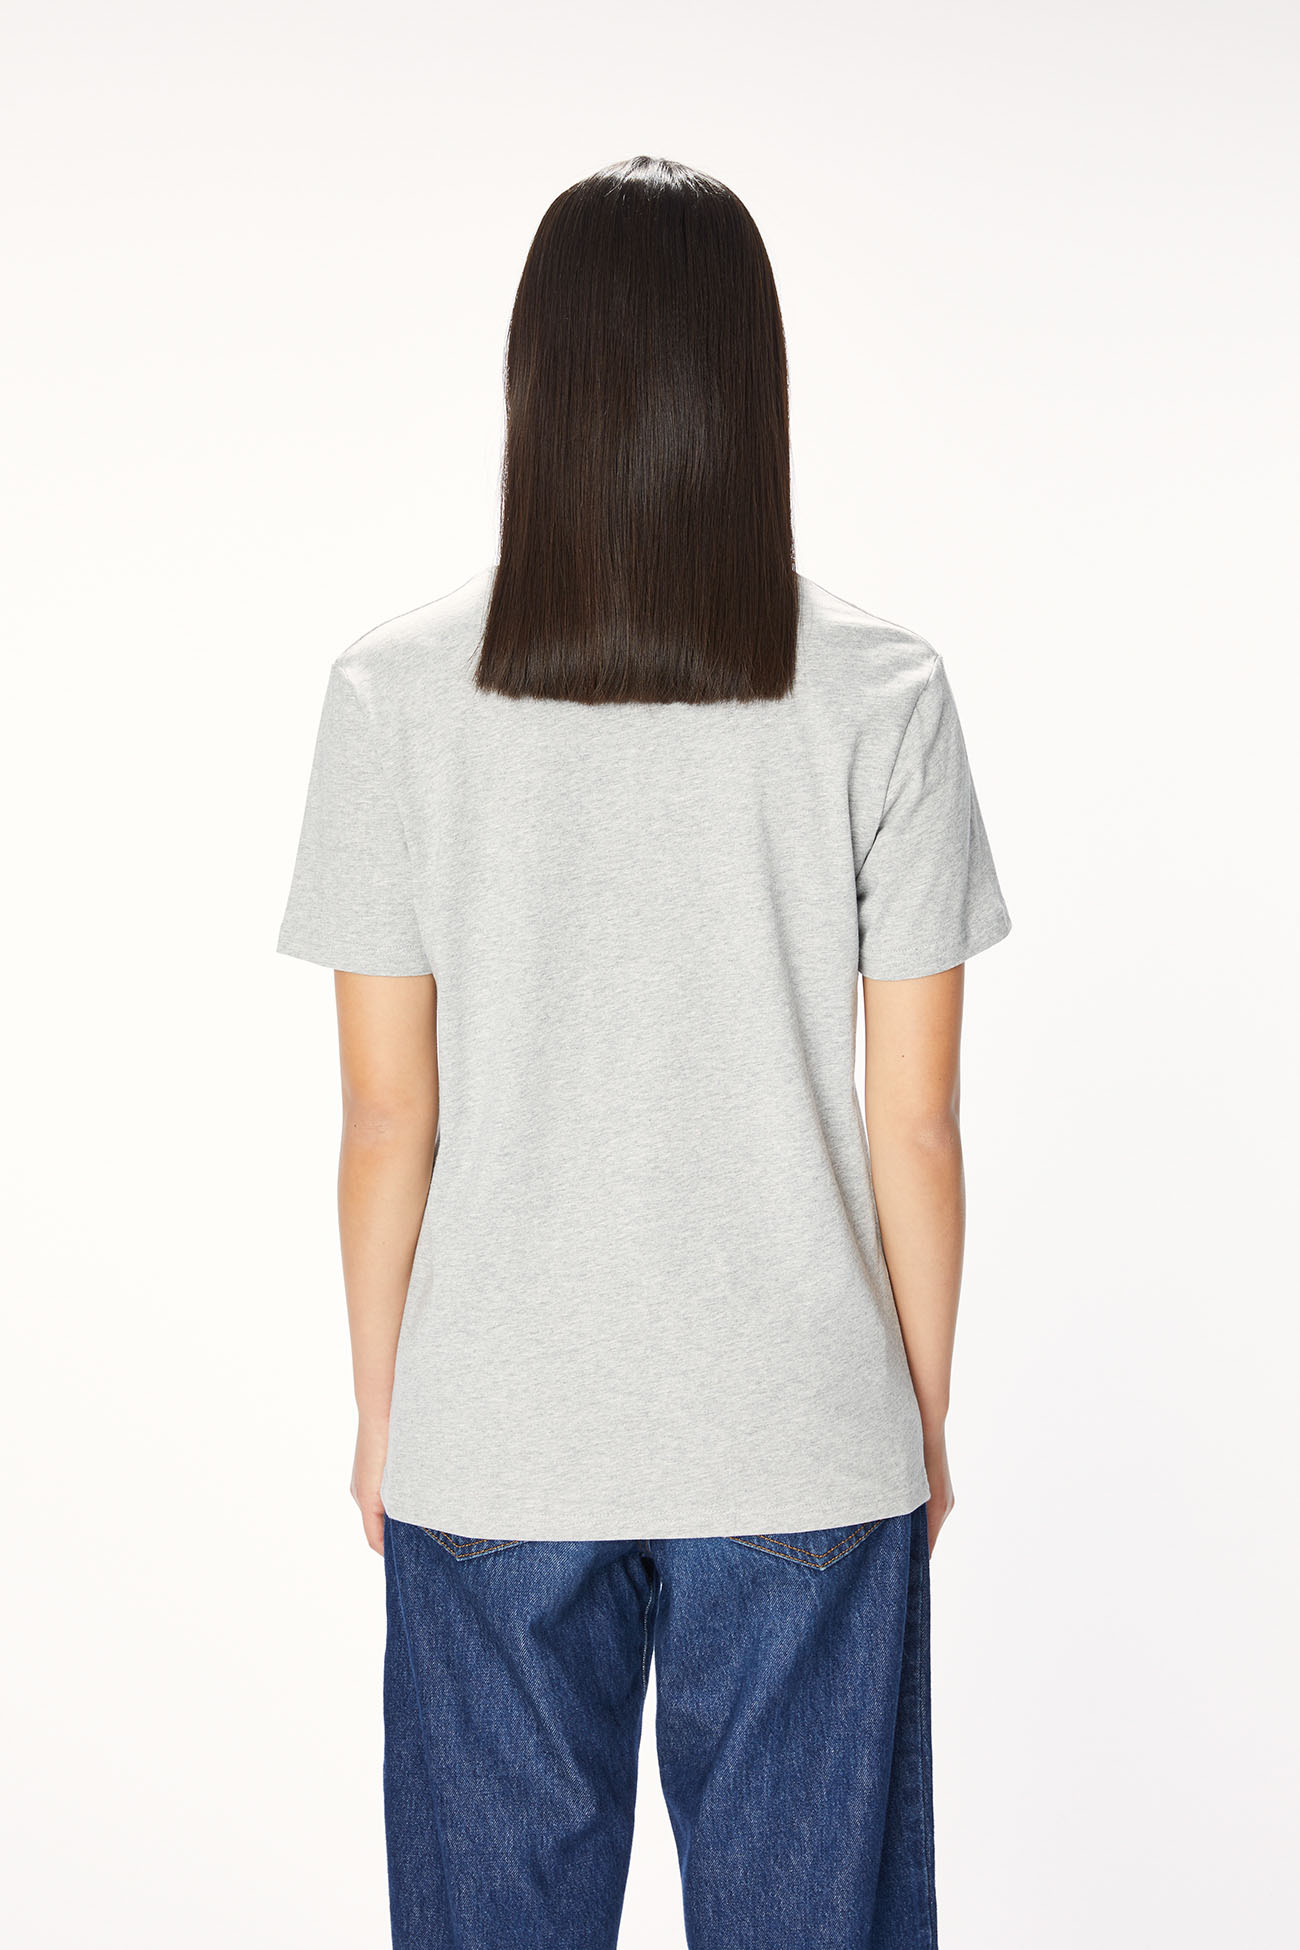 T-SHIRT 7026 MADE IN COTTON  - GRAY MELANGE - OOF WEAR